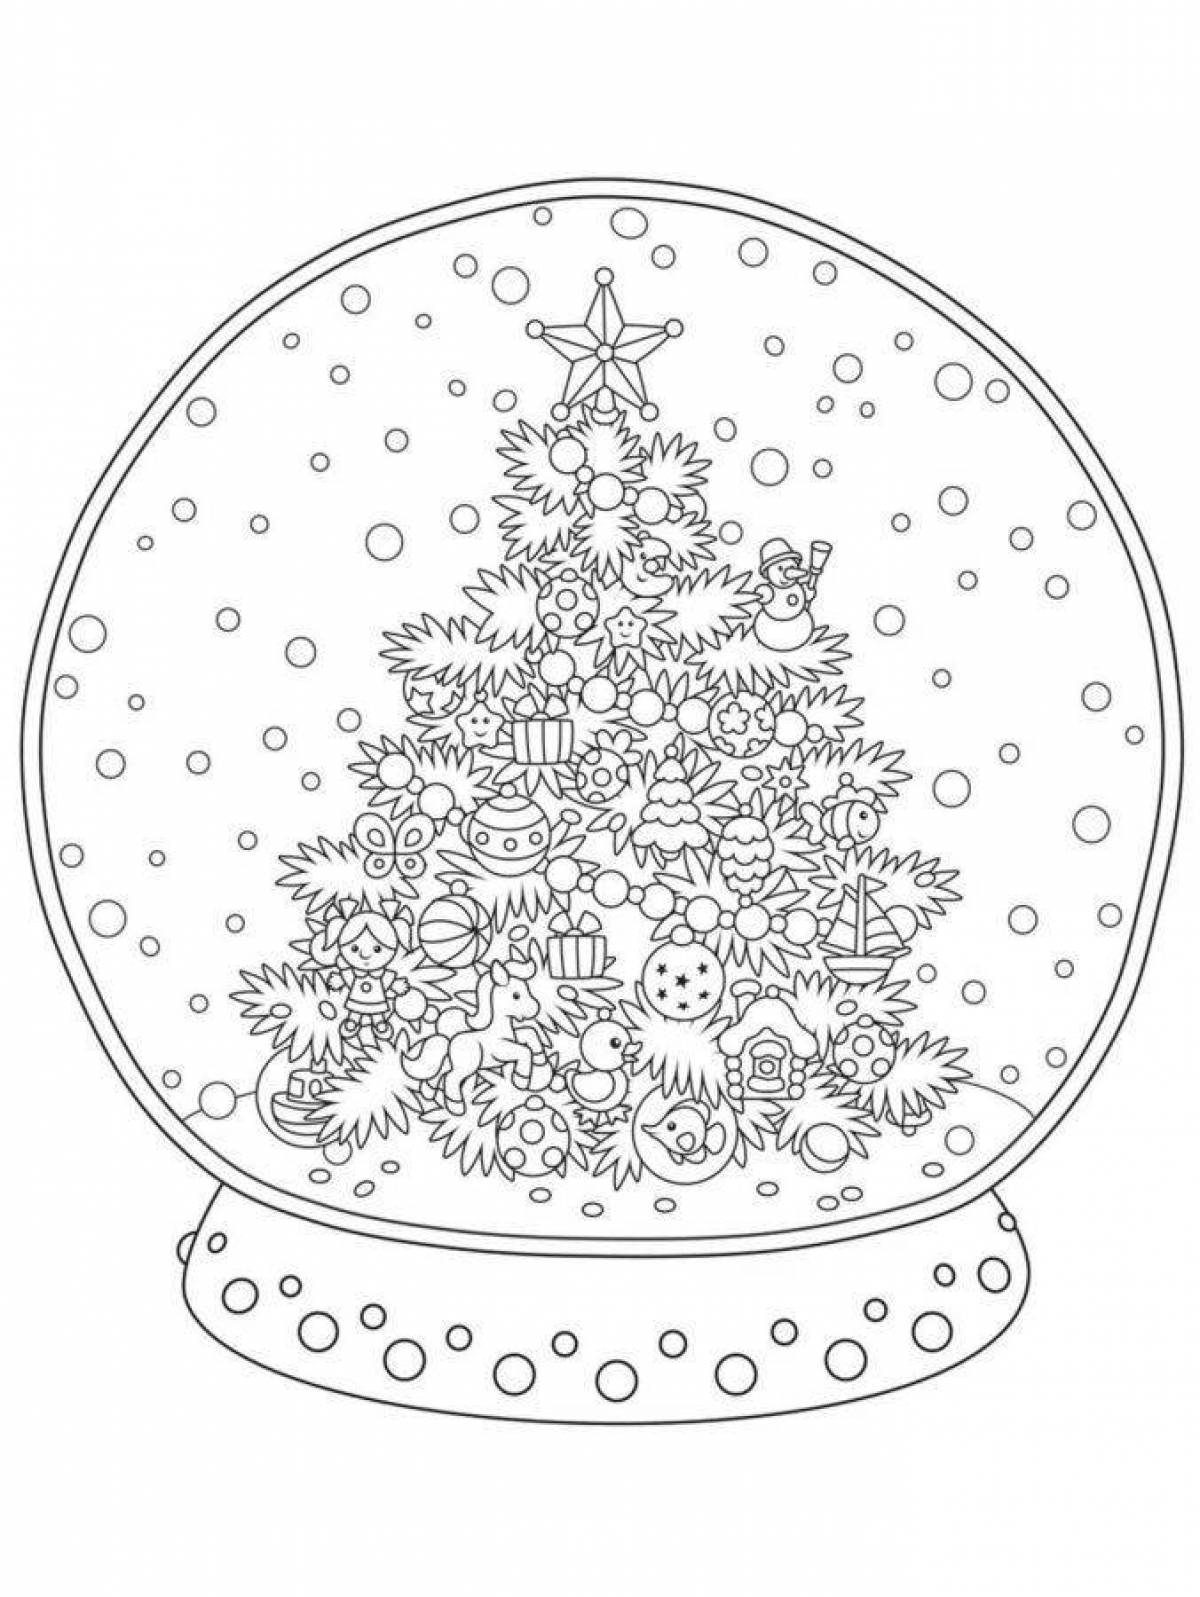 Adorable winter ball coloring page